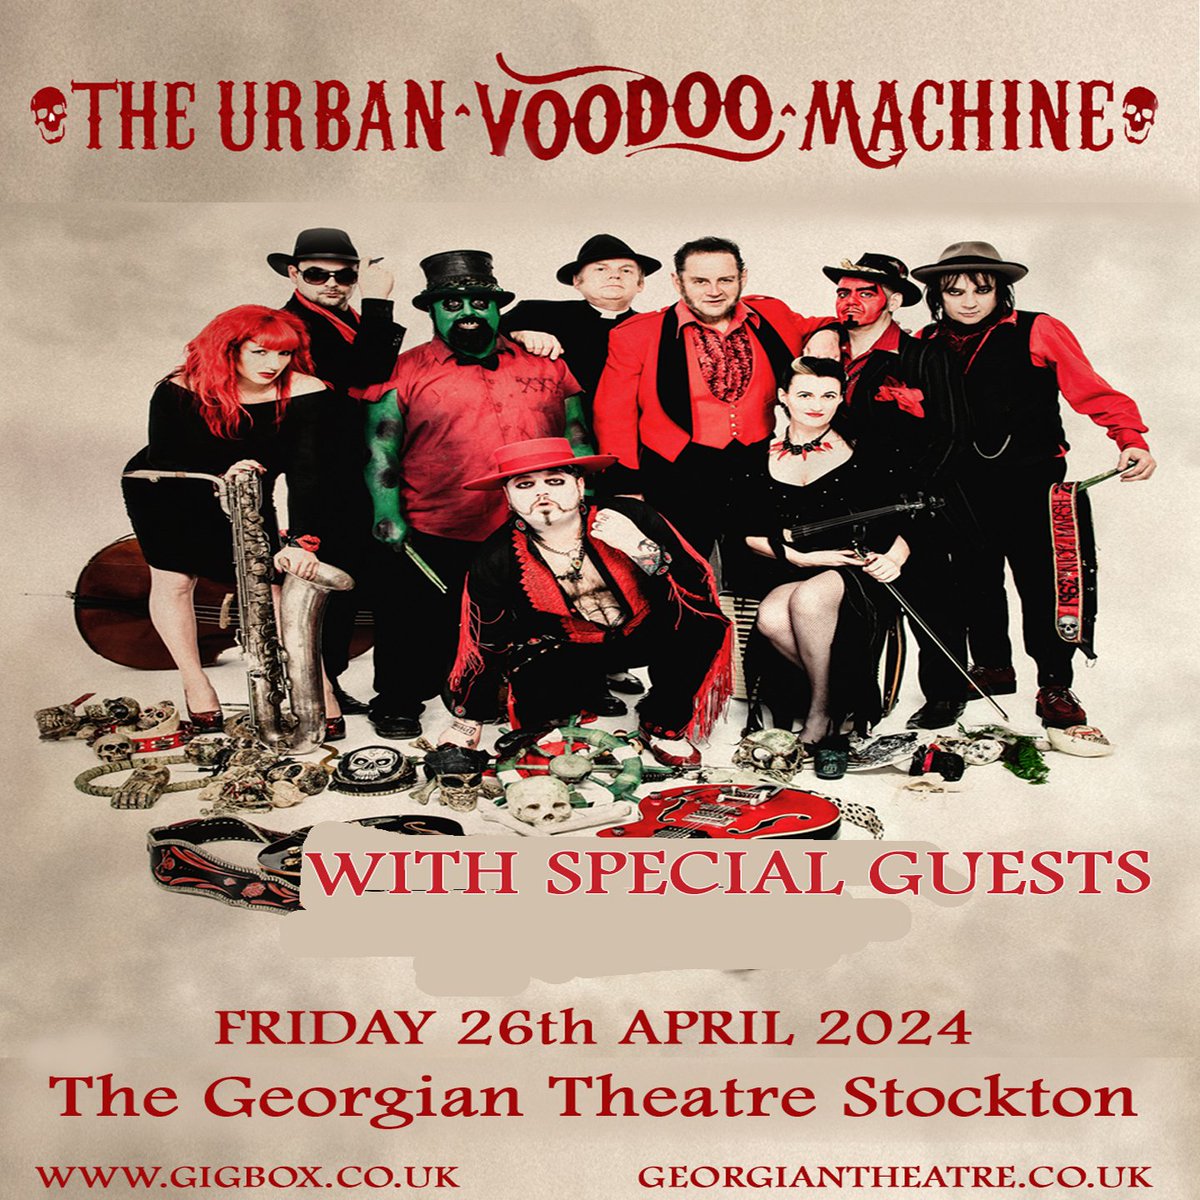 This Friday... JS Promotions Presents @UVMLondon💀 'The Urban Voodoo Machine drip entertainment from every pore, night after night, gig after gig' - RPM Online Support from Millie Watson. Tickets & info: georgiantheatre.co.uk/live-event/ven…